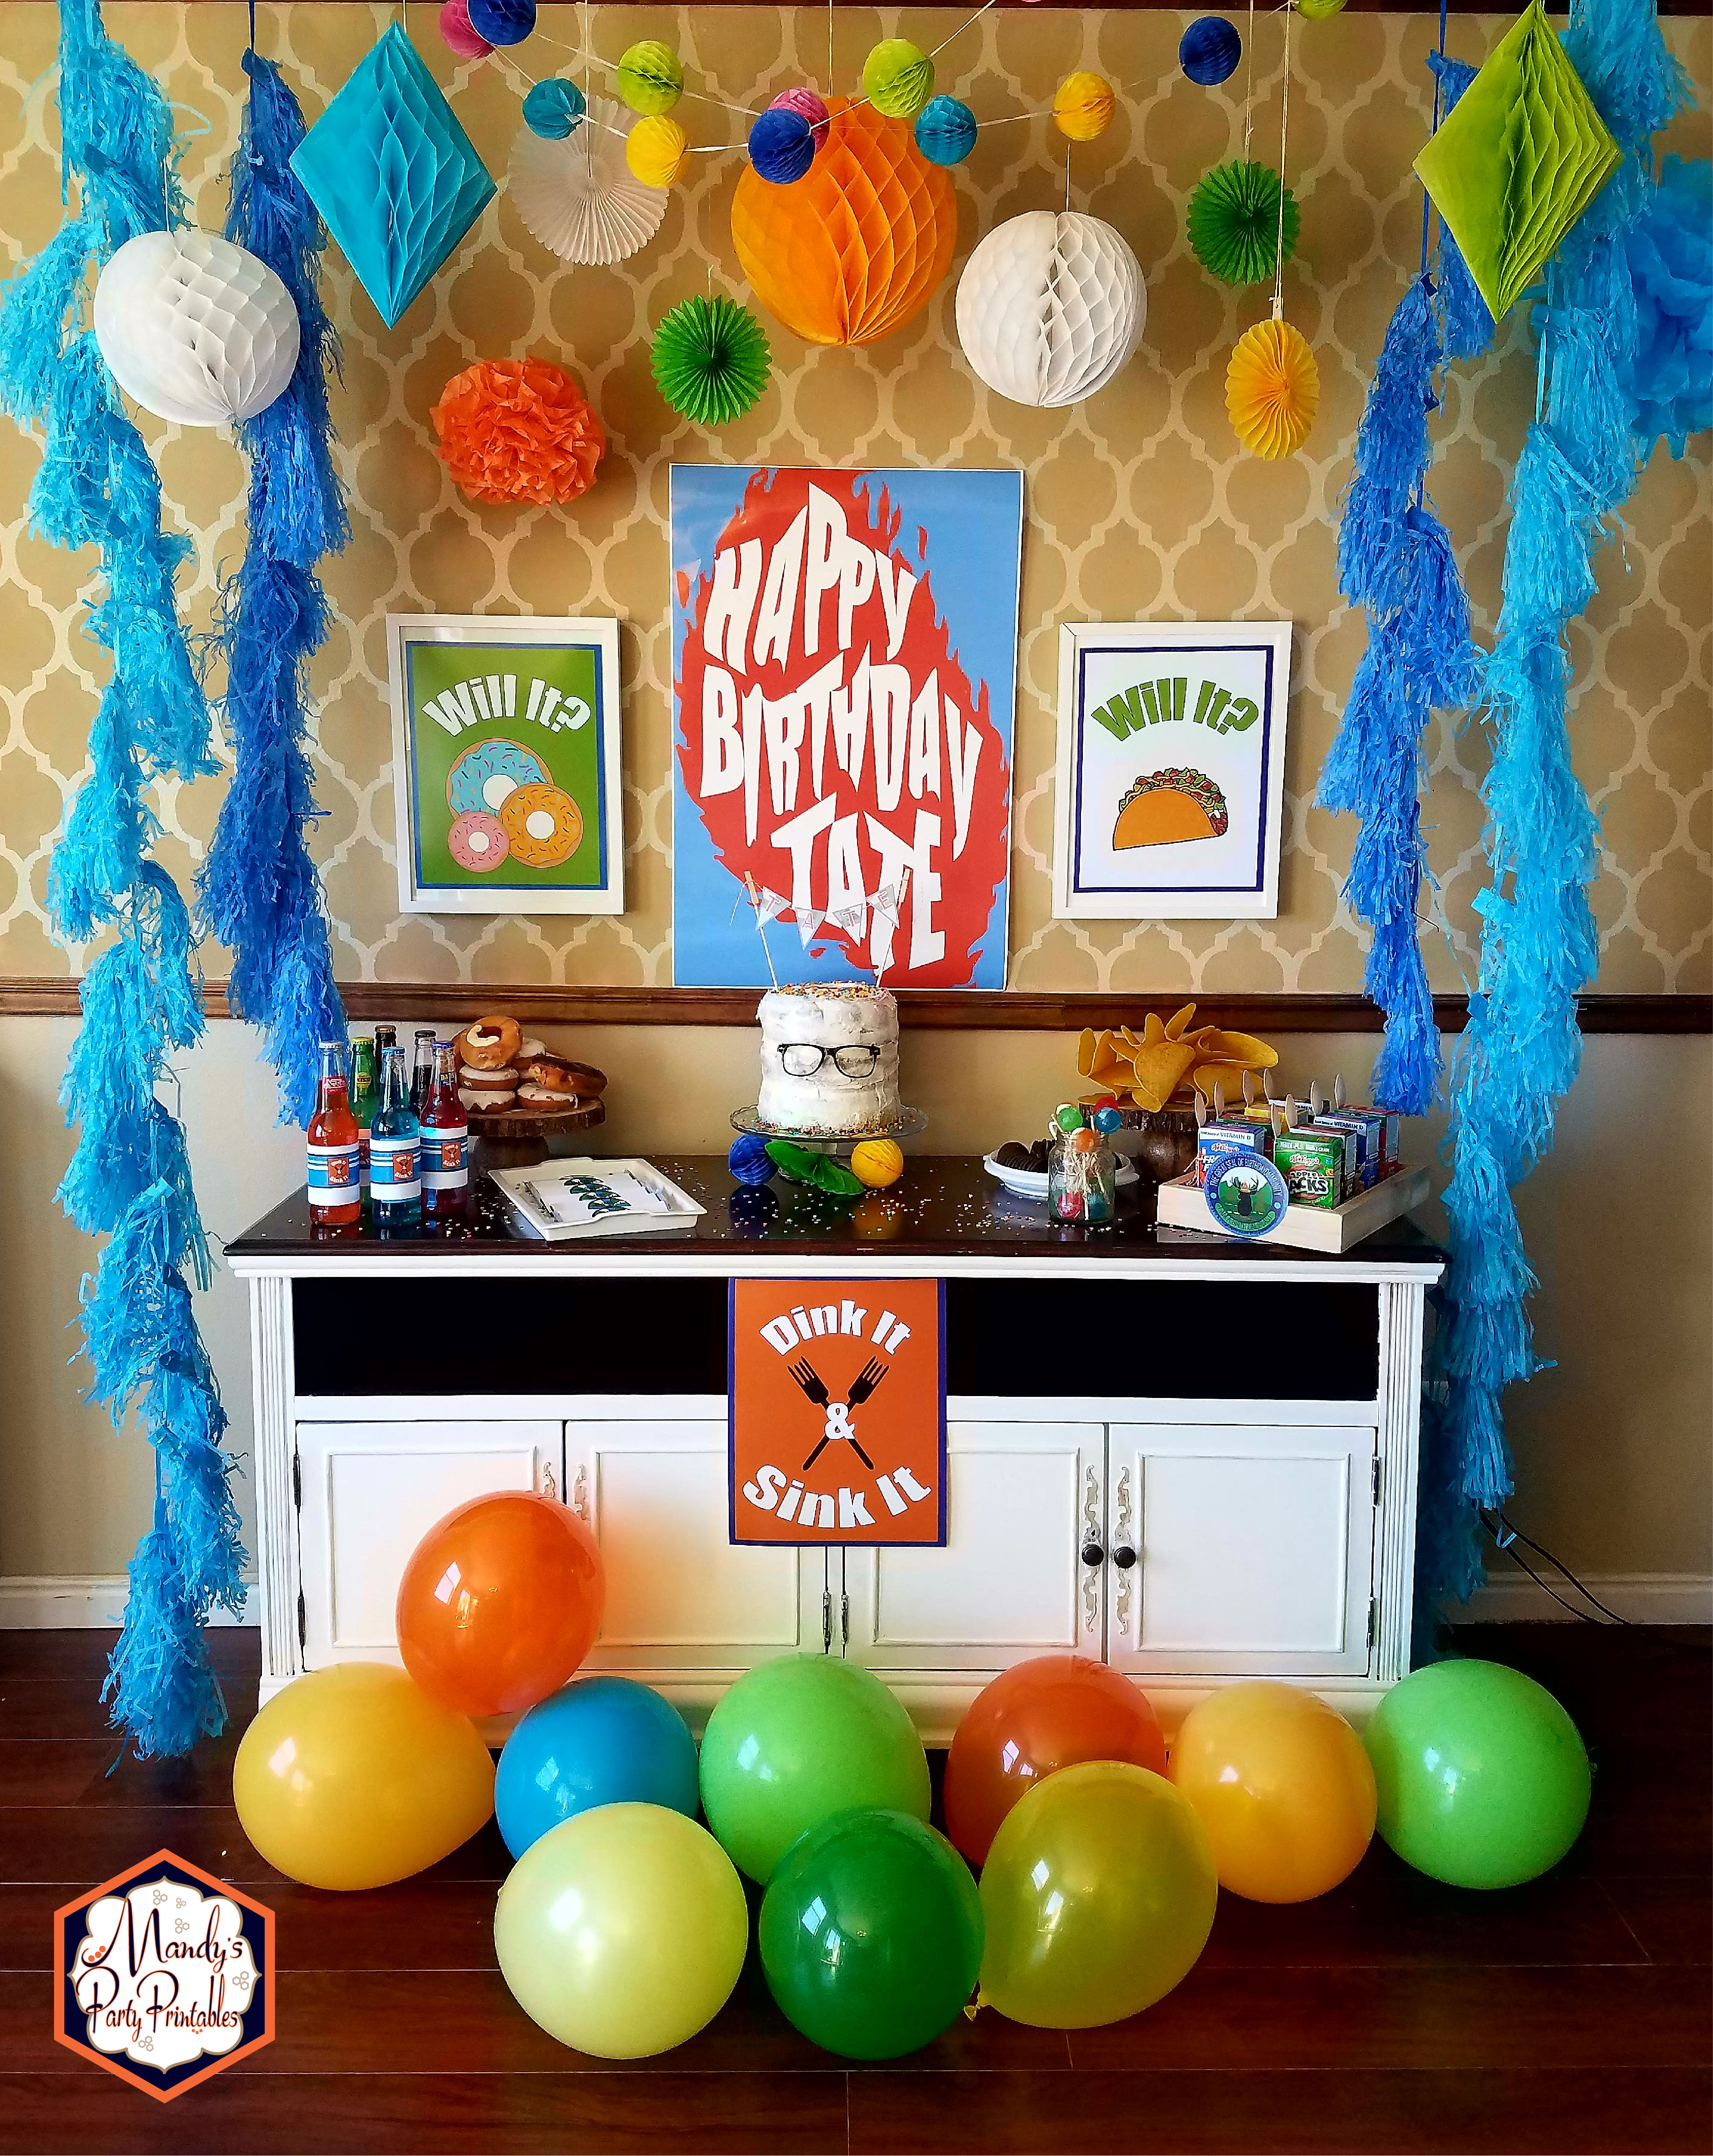  Good Mythical Morning Inspired Birthday Party via Mandy's Party Printables